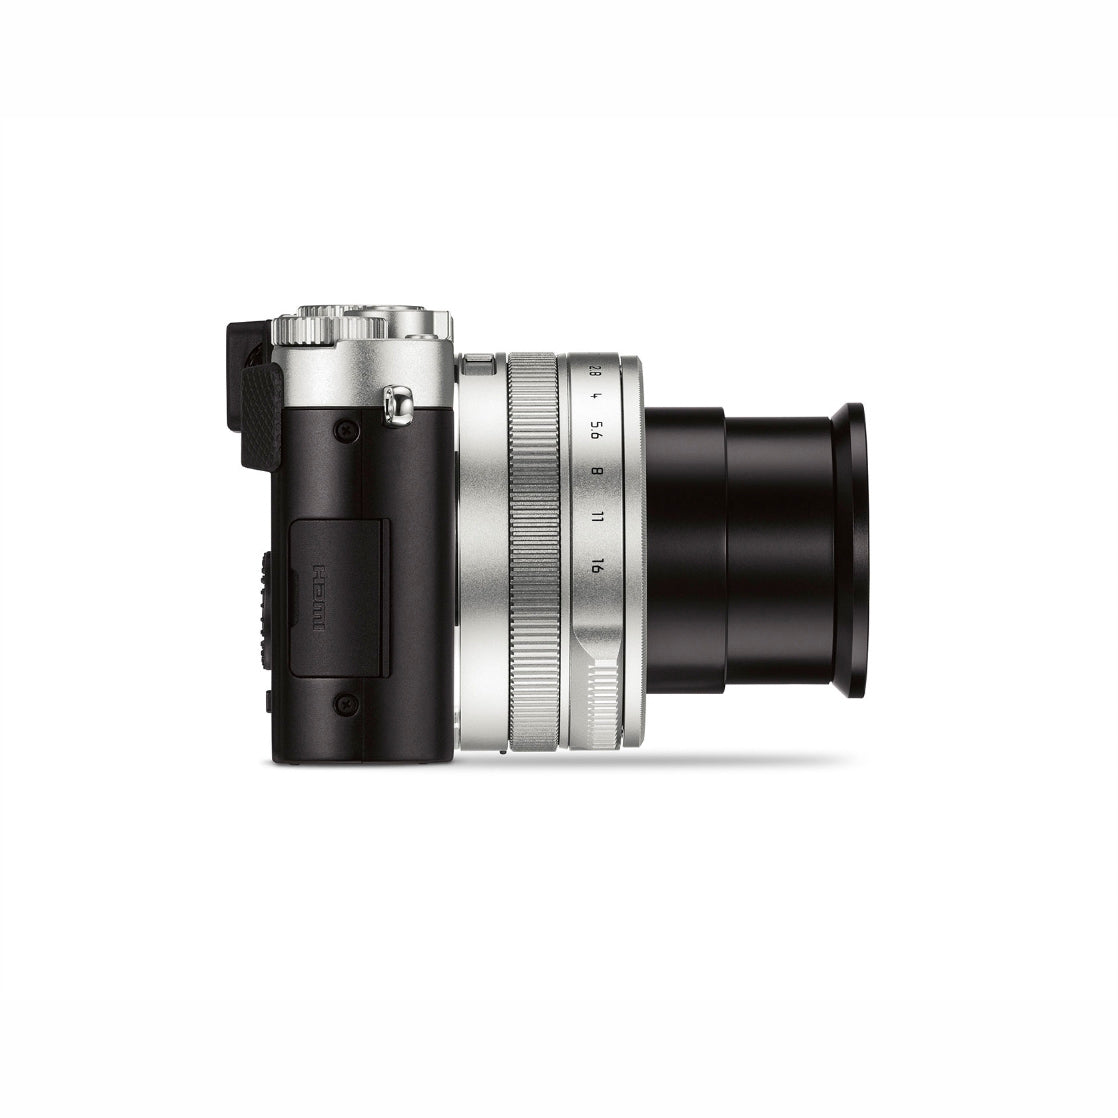 LEICA D-LUX 7 Anodized Silver 